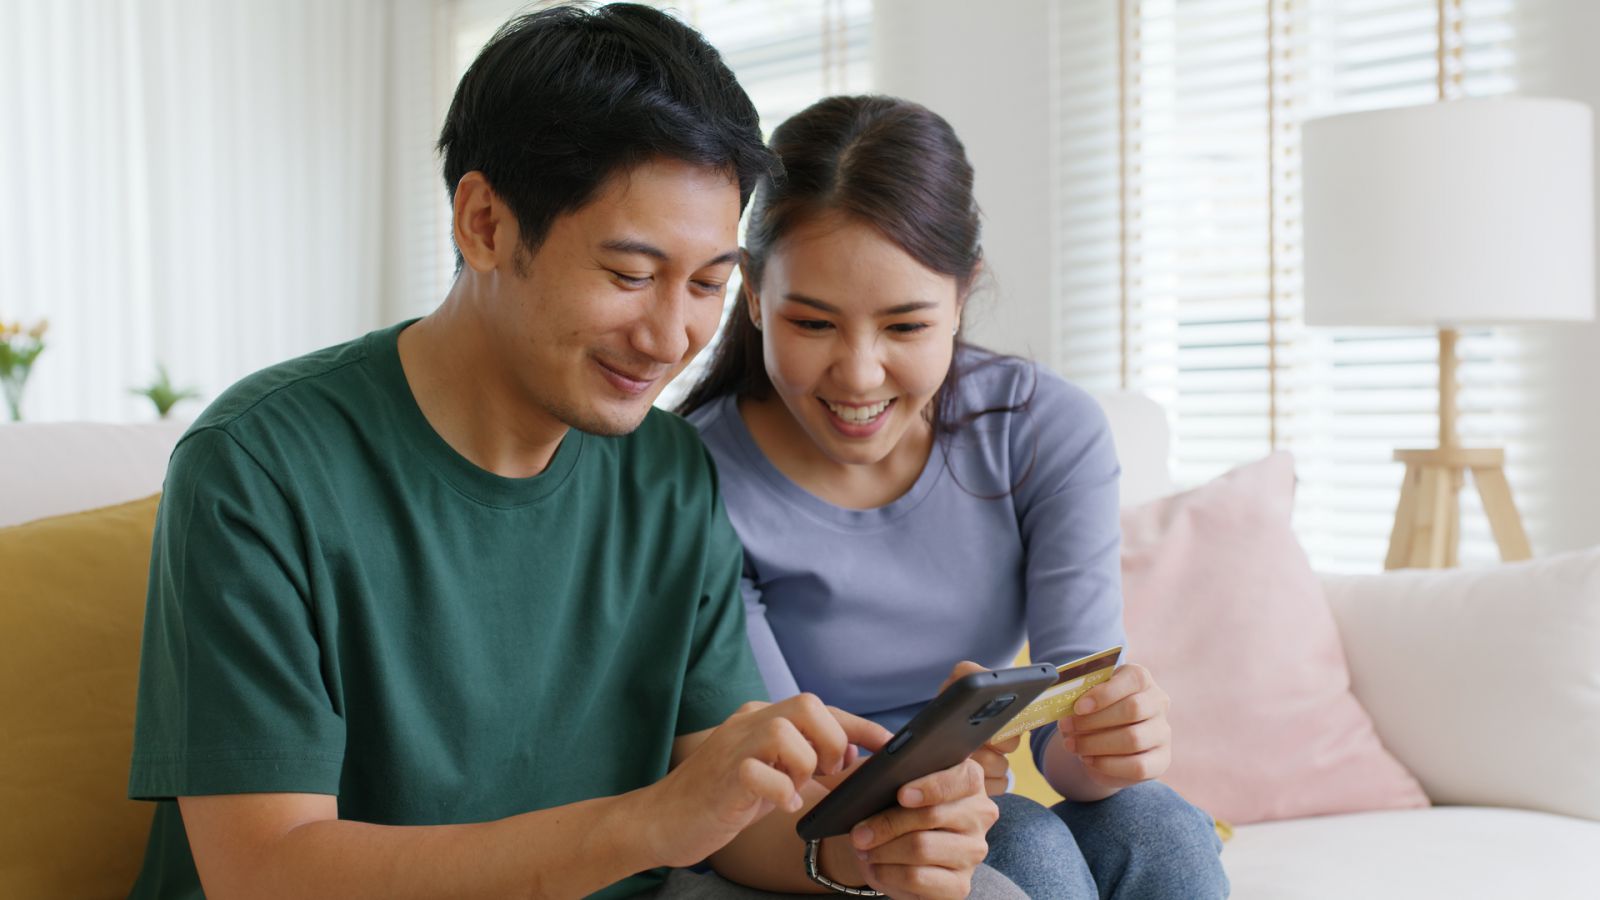 A man and woman smile as they make an online purchase.